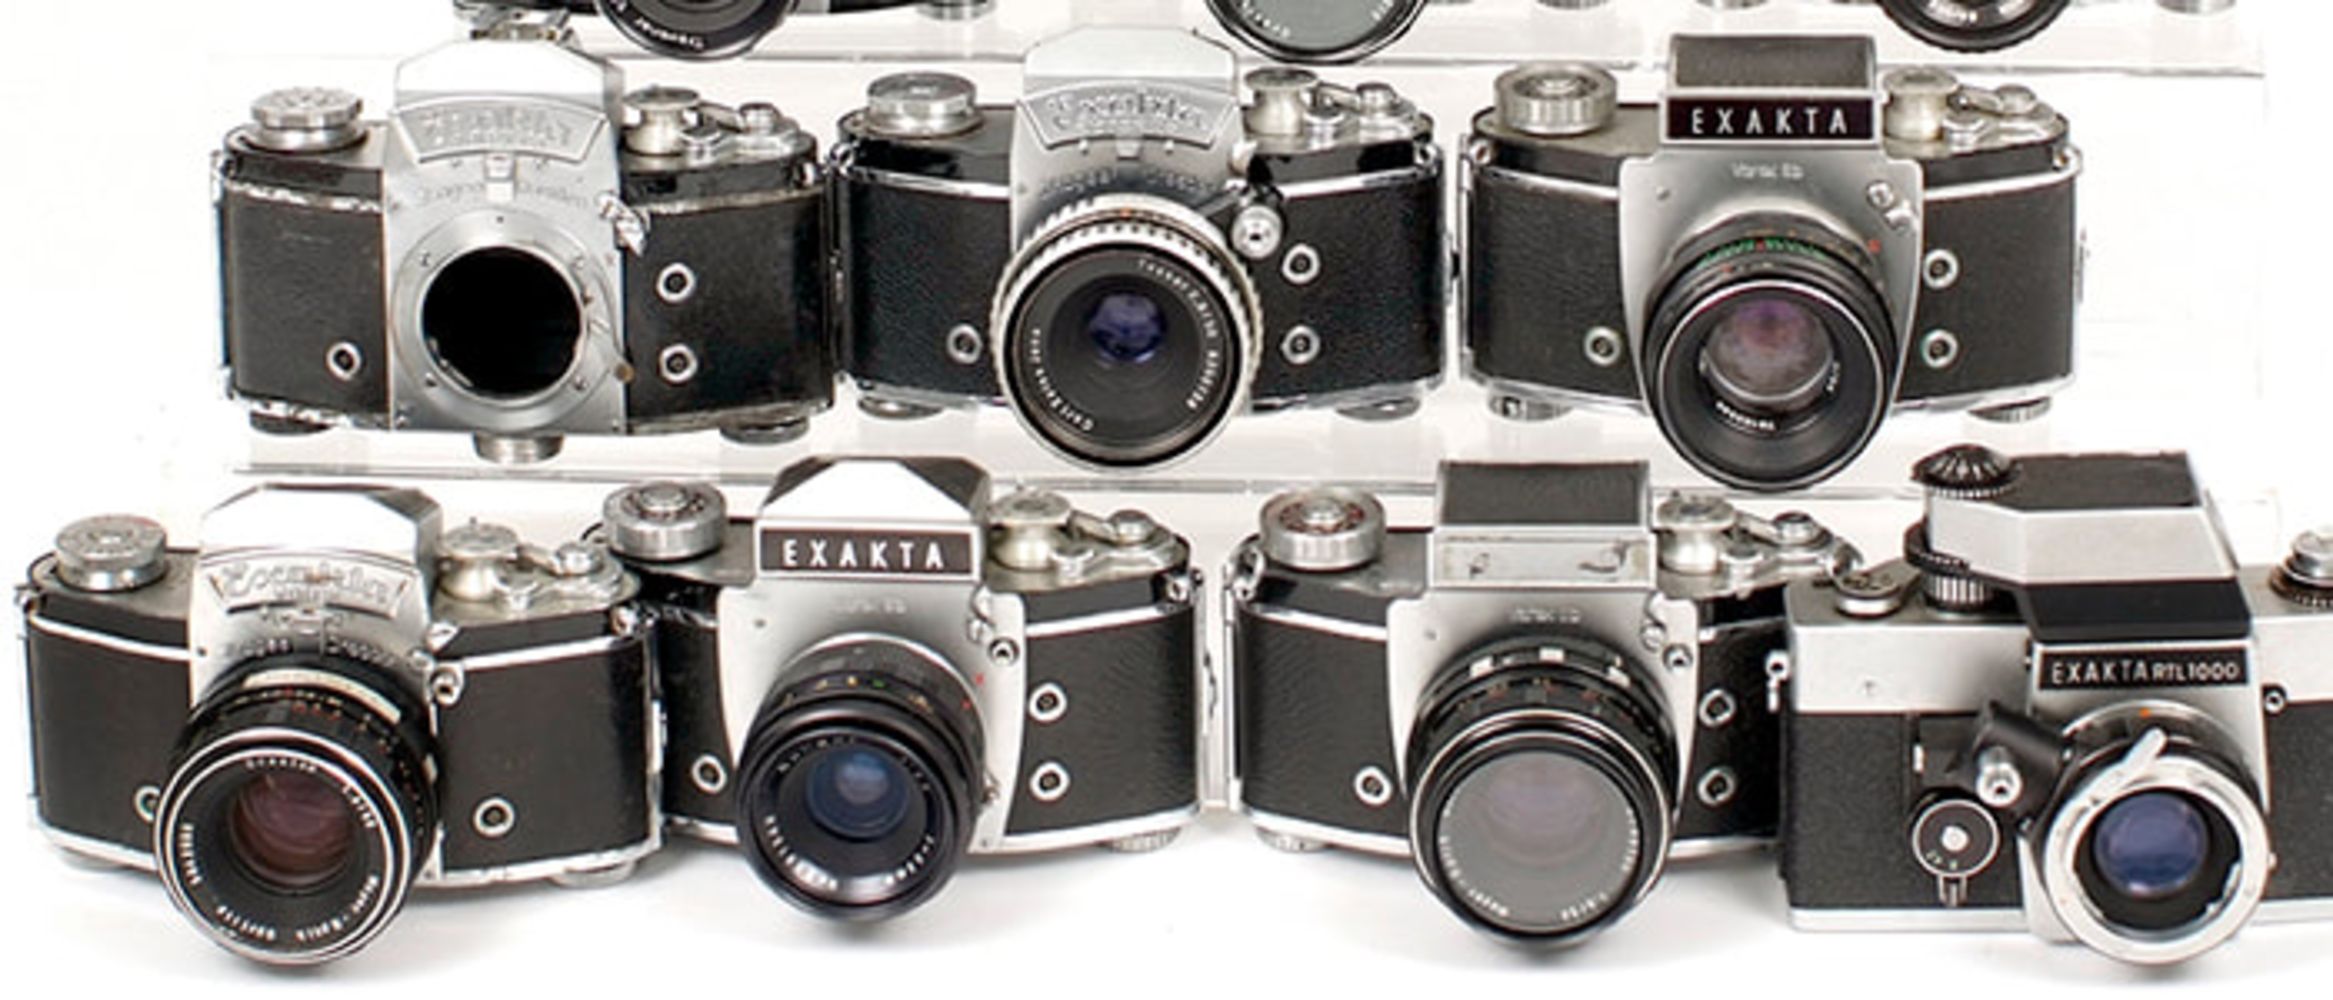 CAMERAS & PHOTOGRAPHIC EQUIPMENT AUCTION - ONLINE ONLY